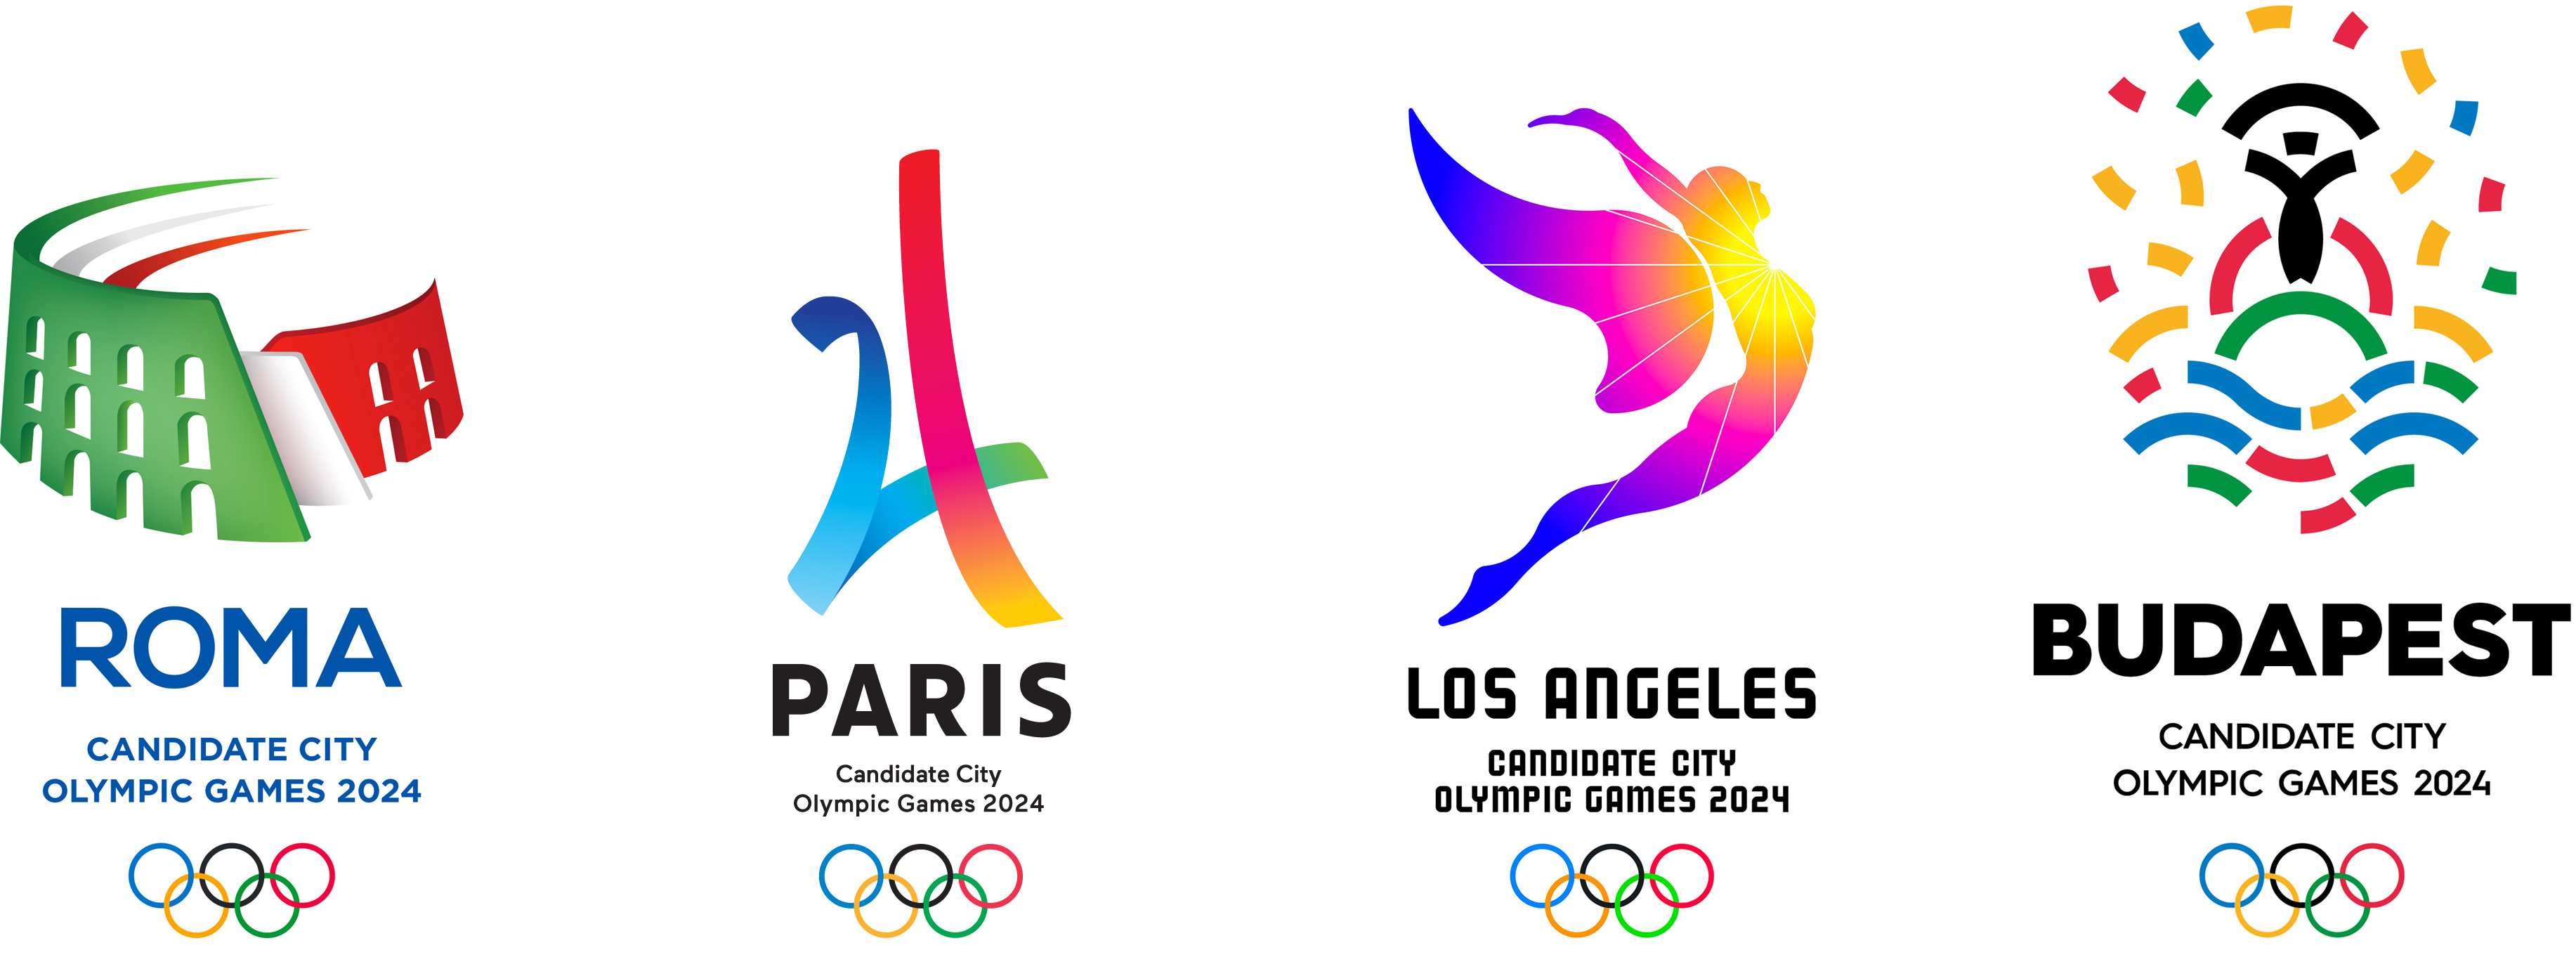 Brand New New Logo for Budapest 2024 Candidate City by Graphasel